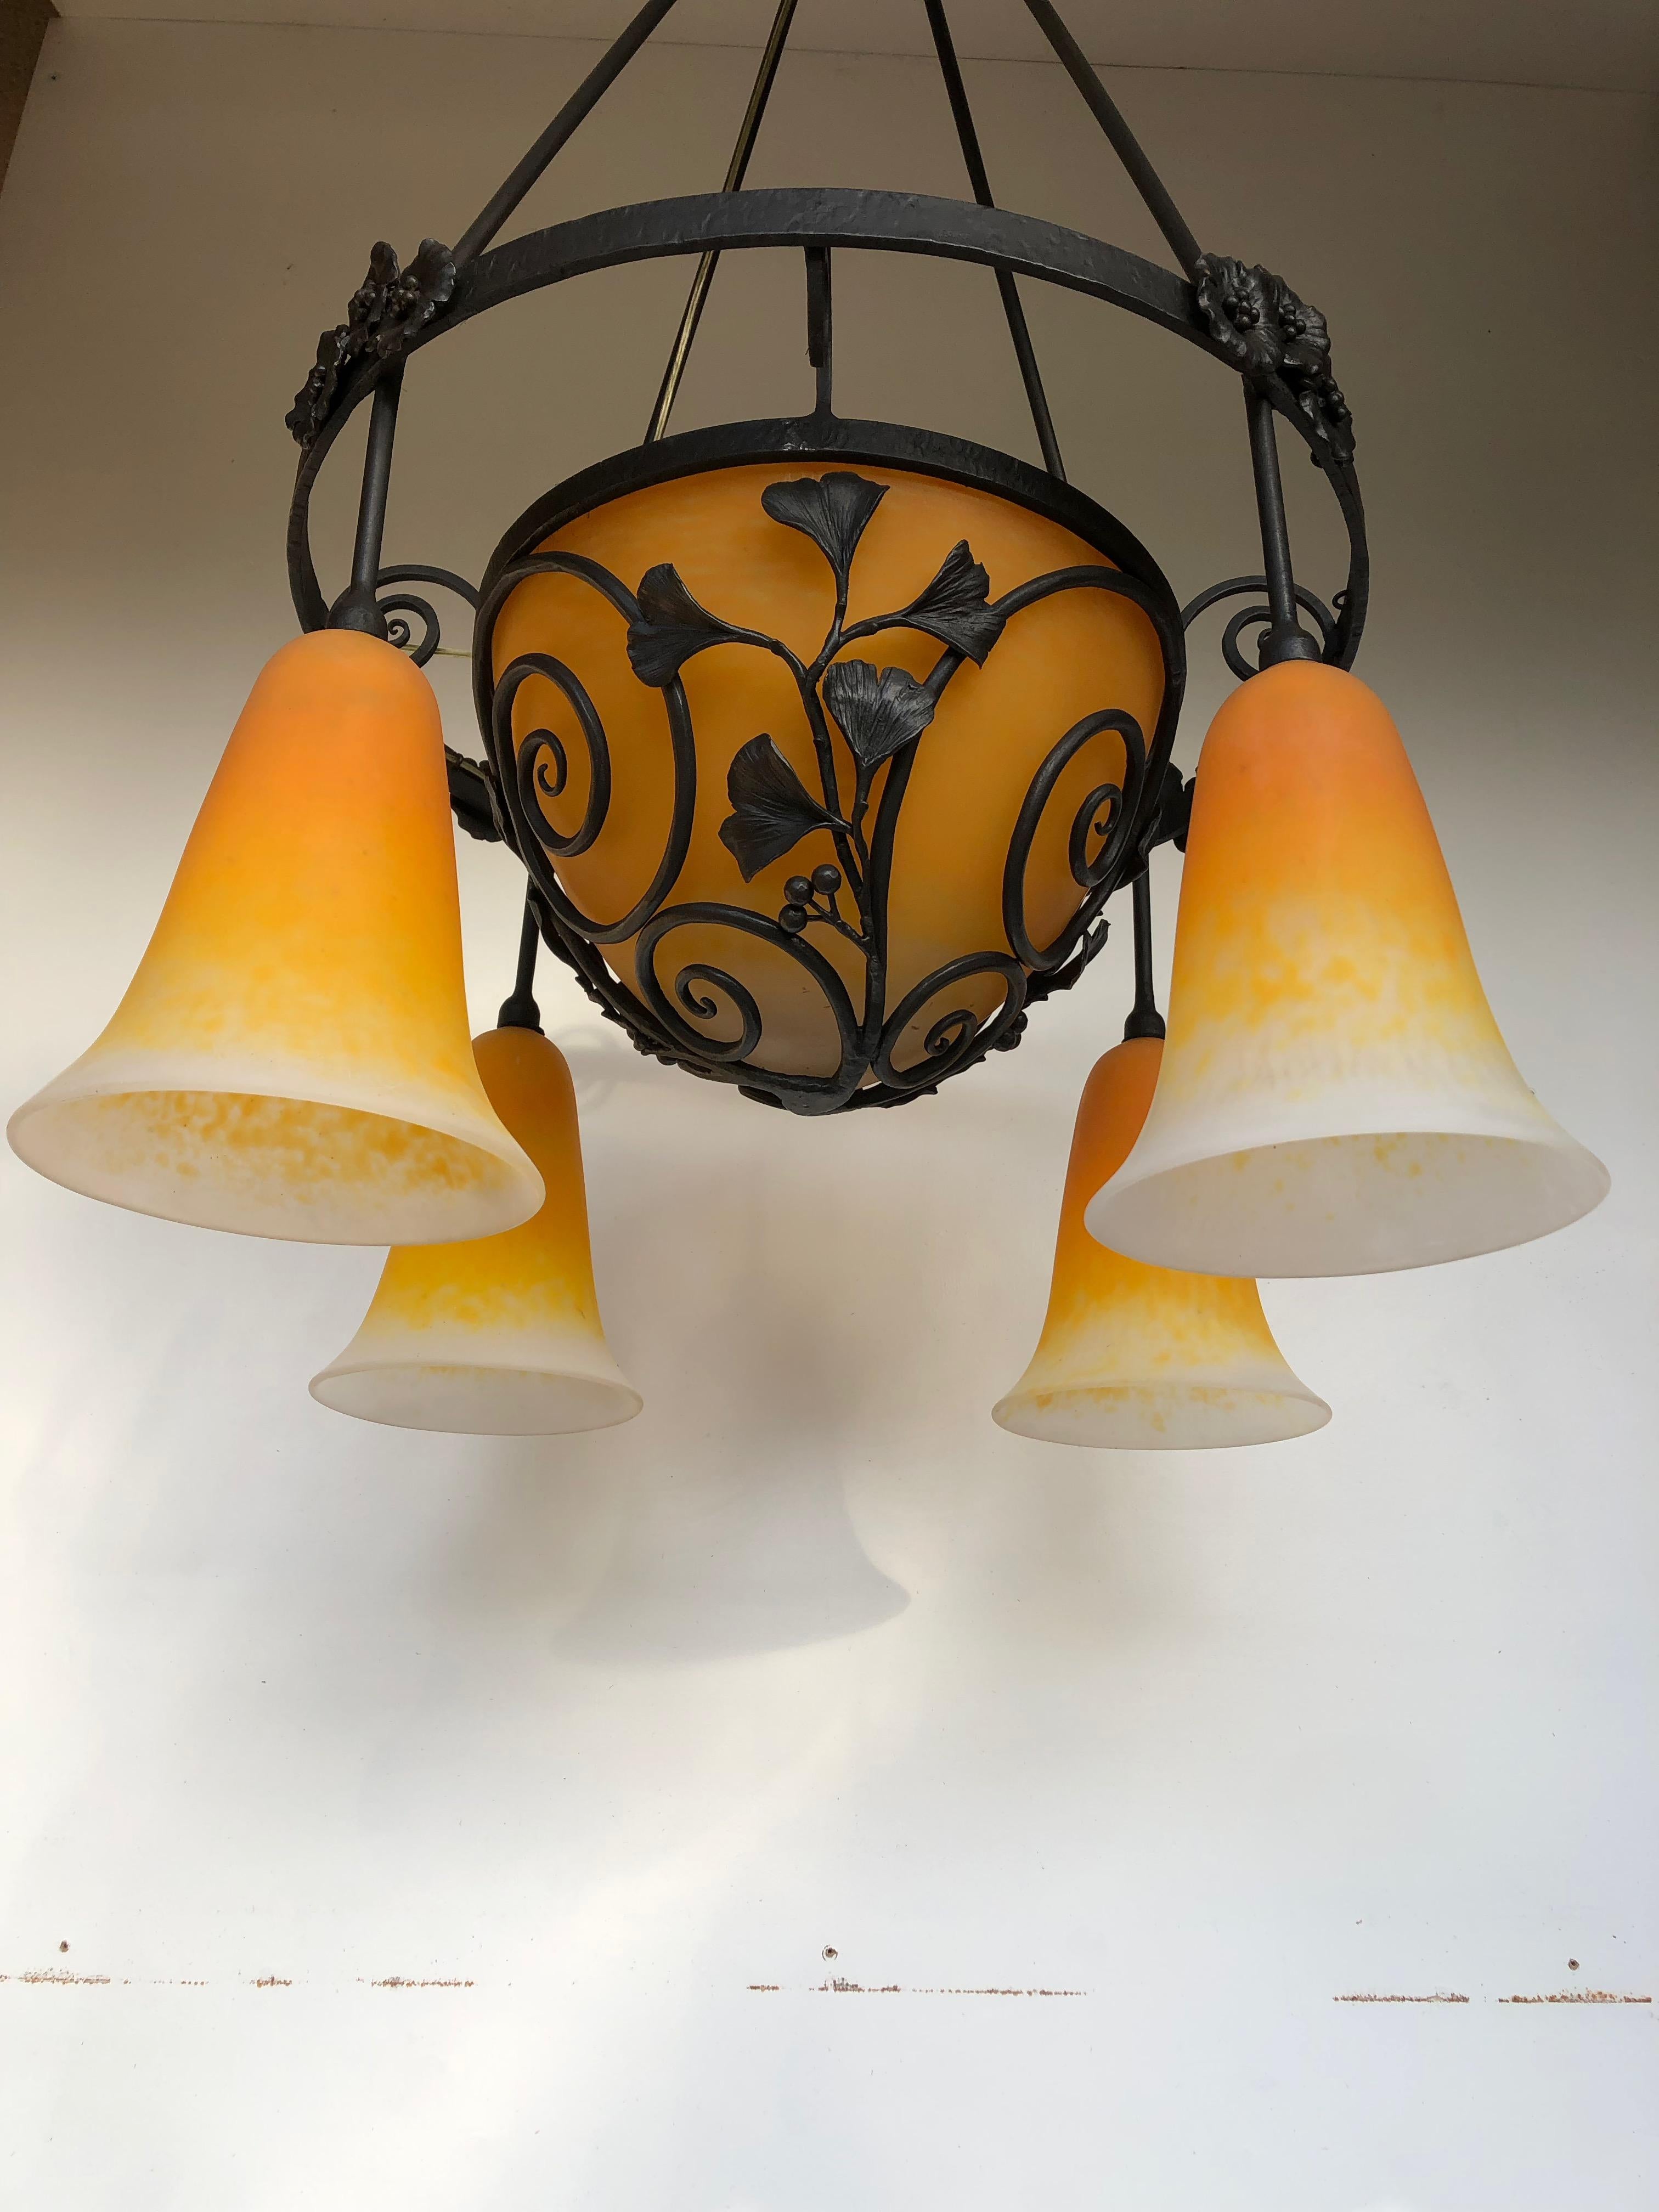 Art deco wrought iron chandelier with ginkgo biloba leaf decoration, circa 1925.
4 tulips and a central glass paste shell signed Daum Nancy.
Frame stamped E Brandt.
Chandelier electrified and in perfect condition.
This chandelier will be